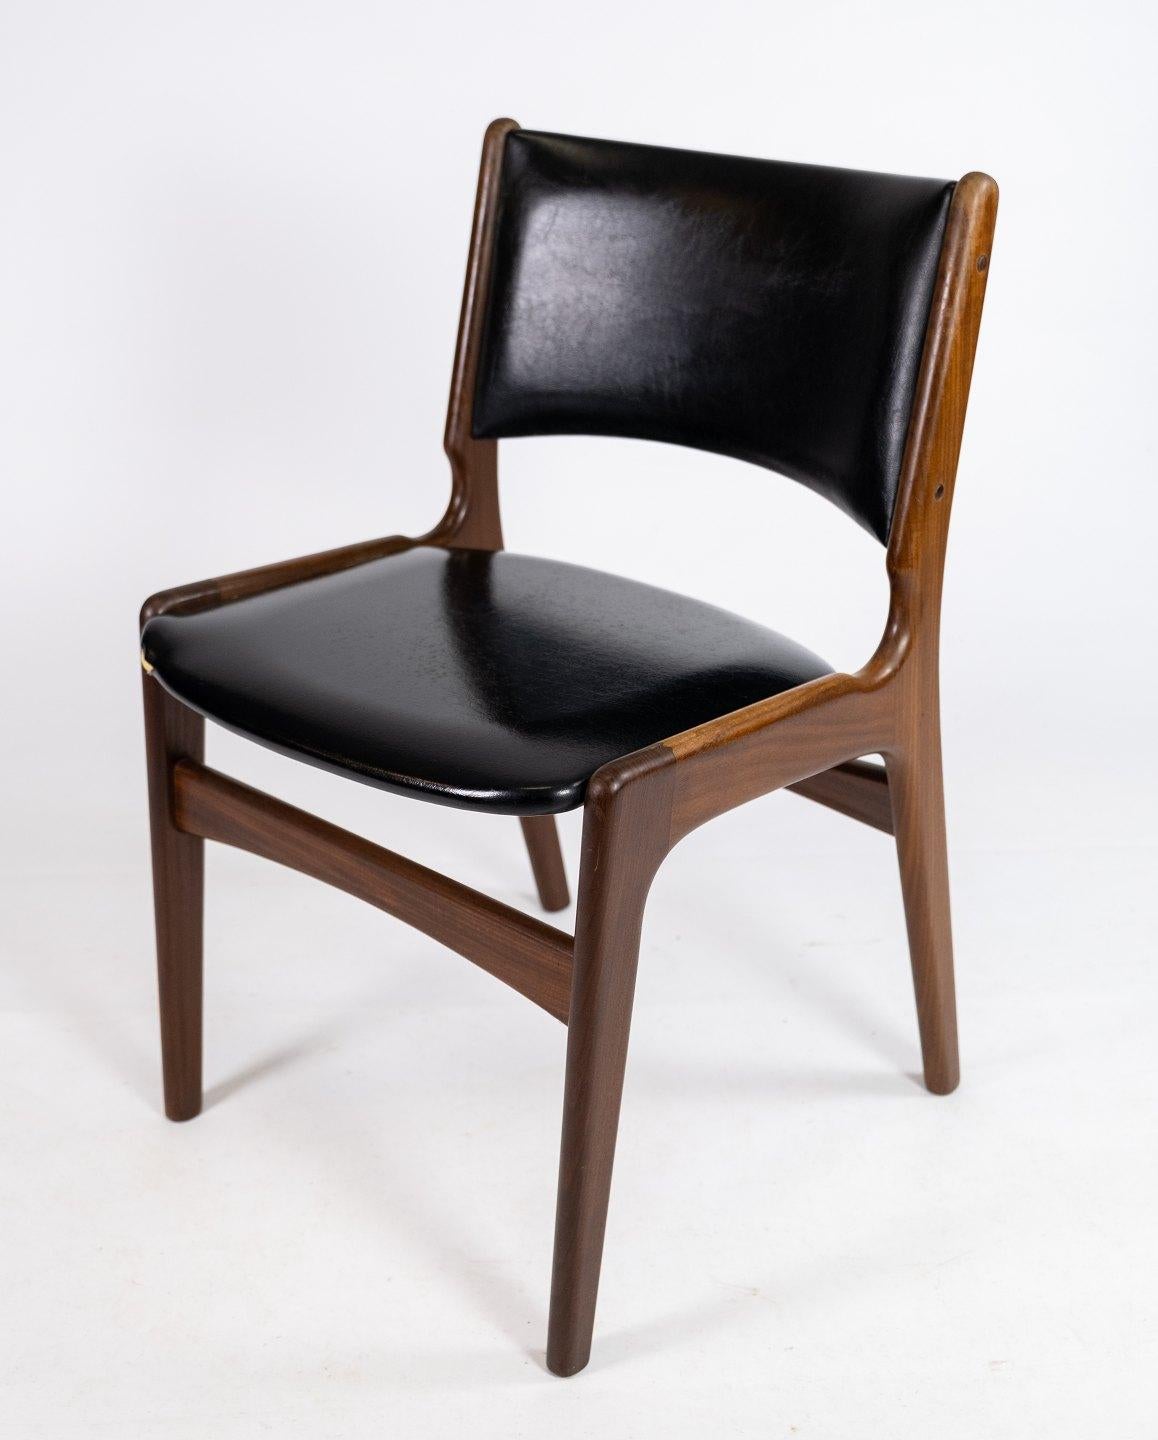 A set of chairs in teak and with black leather designed by Erik Buch from the 1960s. The chairs are in great vintage condition.
  